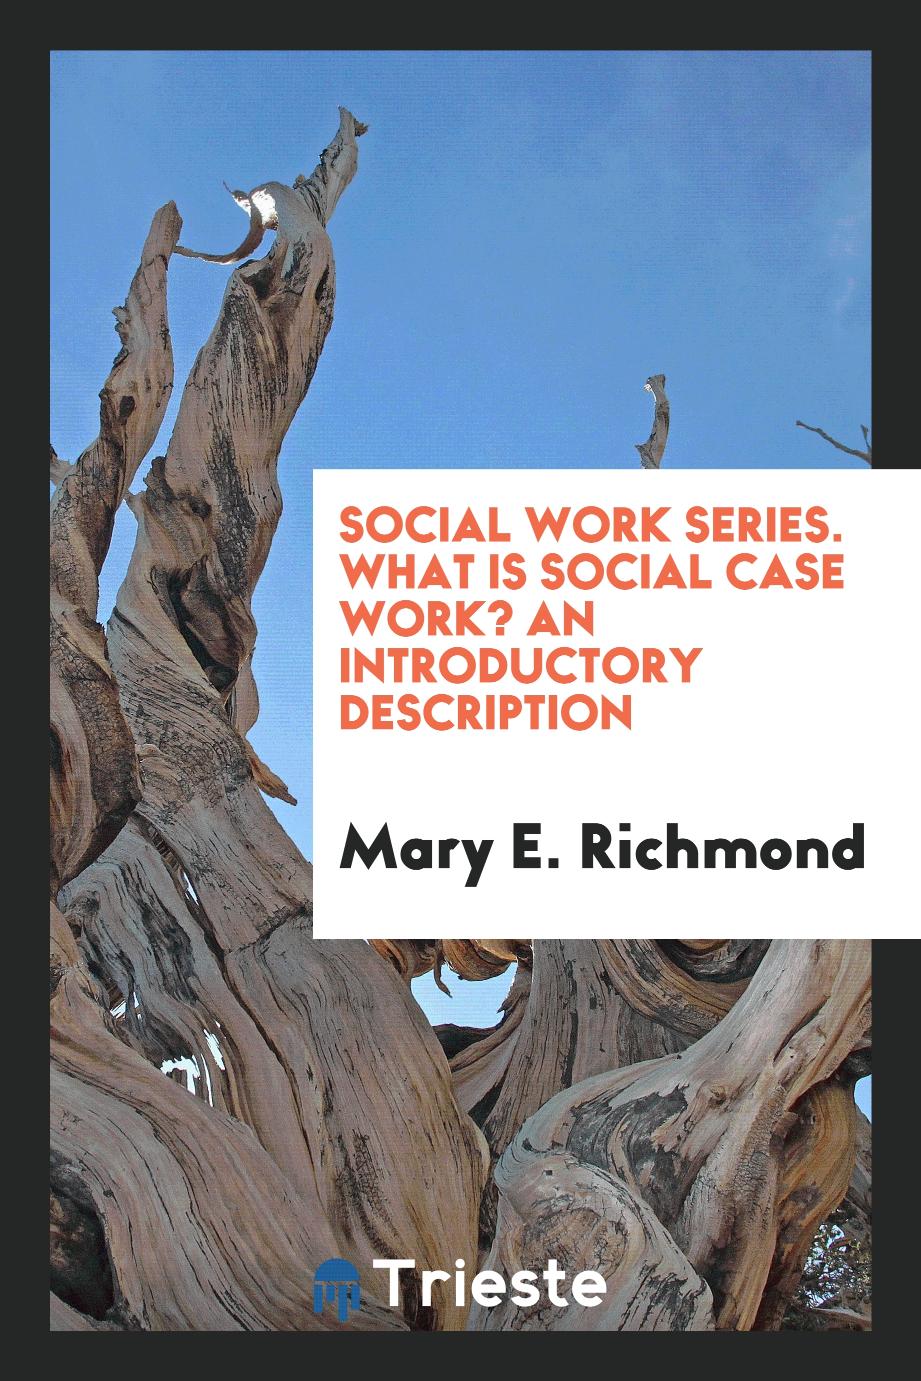 Social Work Series. What Is Social Case Work? An Introductory Description